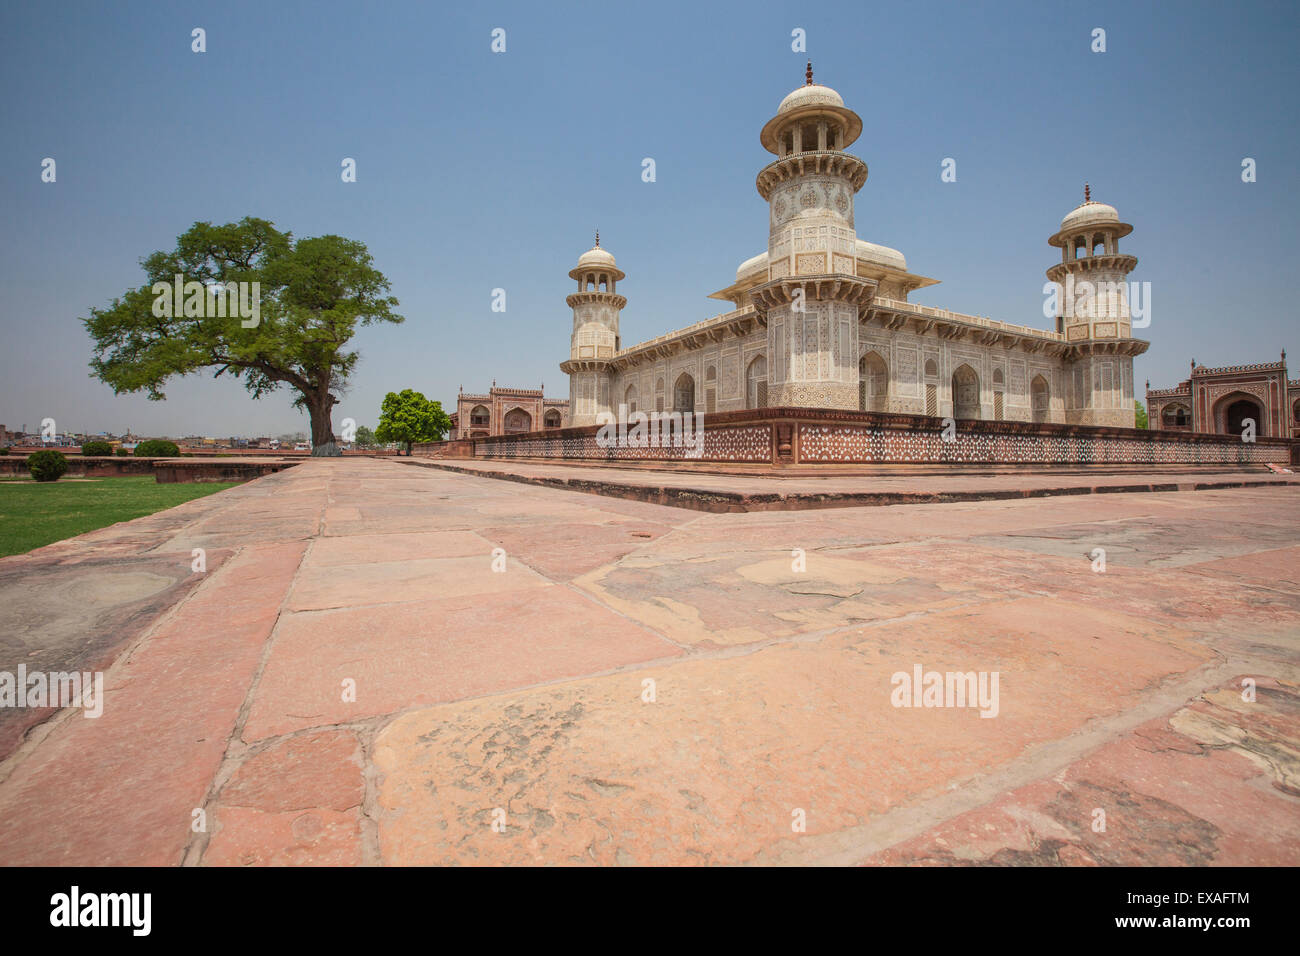 Main building of the funerary complex Humayun's tomb, the first garden tomb in the Indian Subcontinent, Delhi, India, Asia Stock Photo